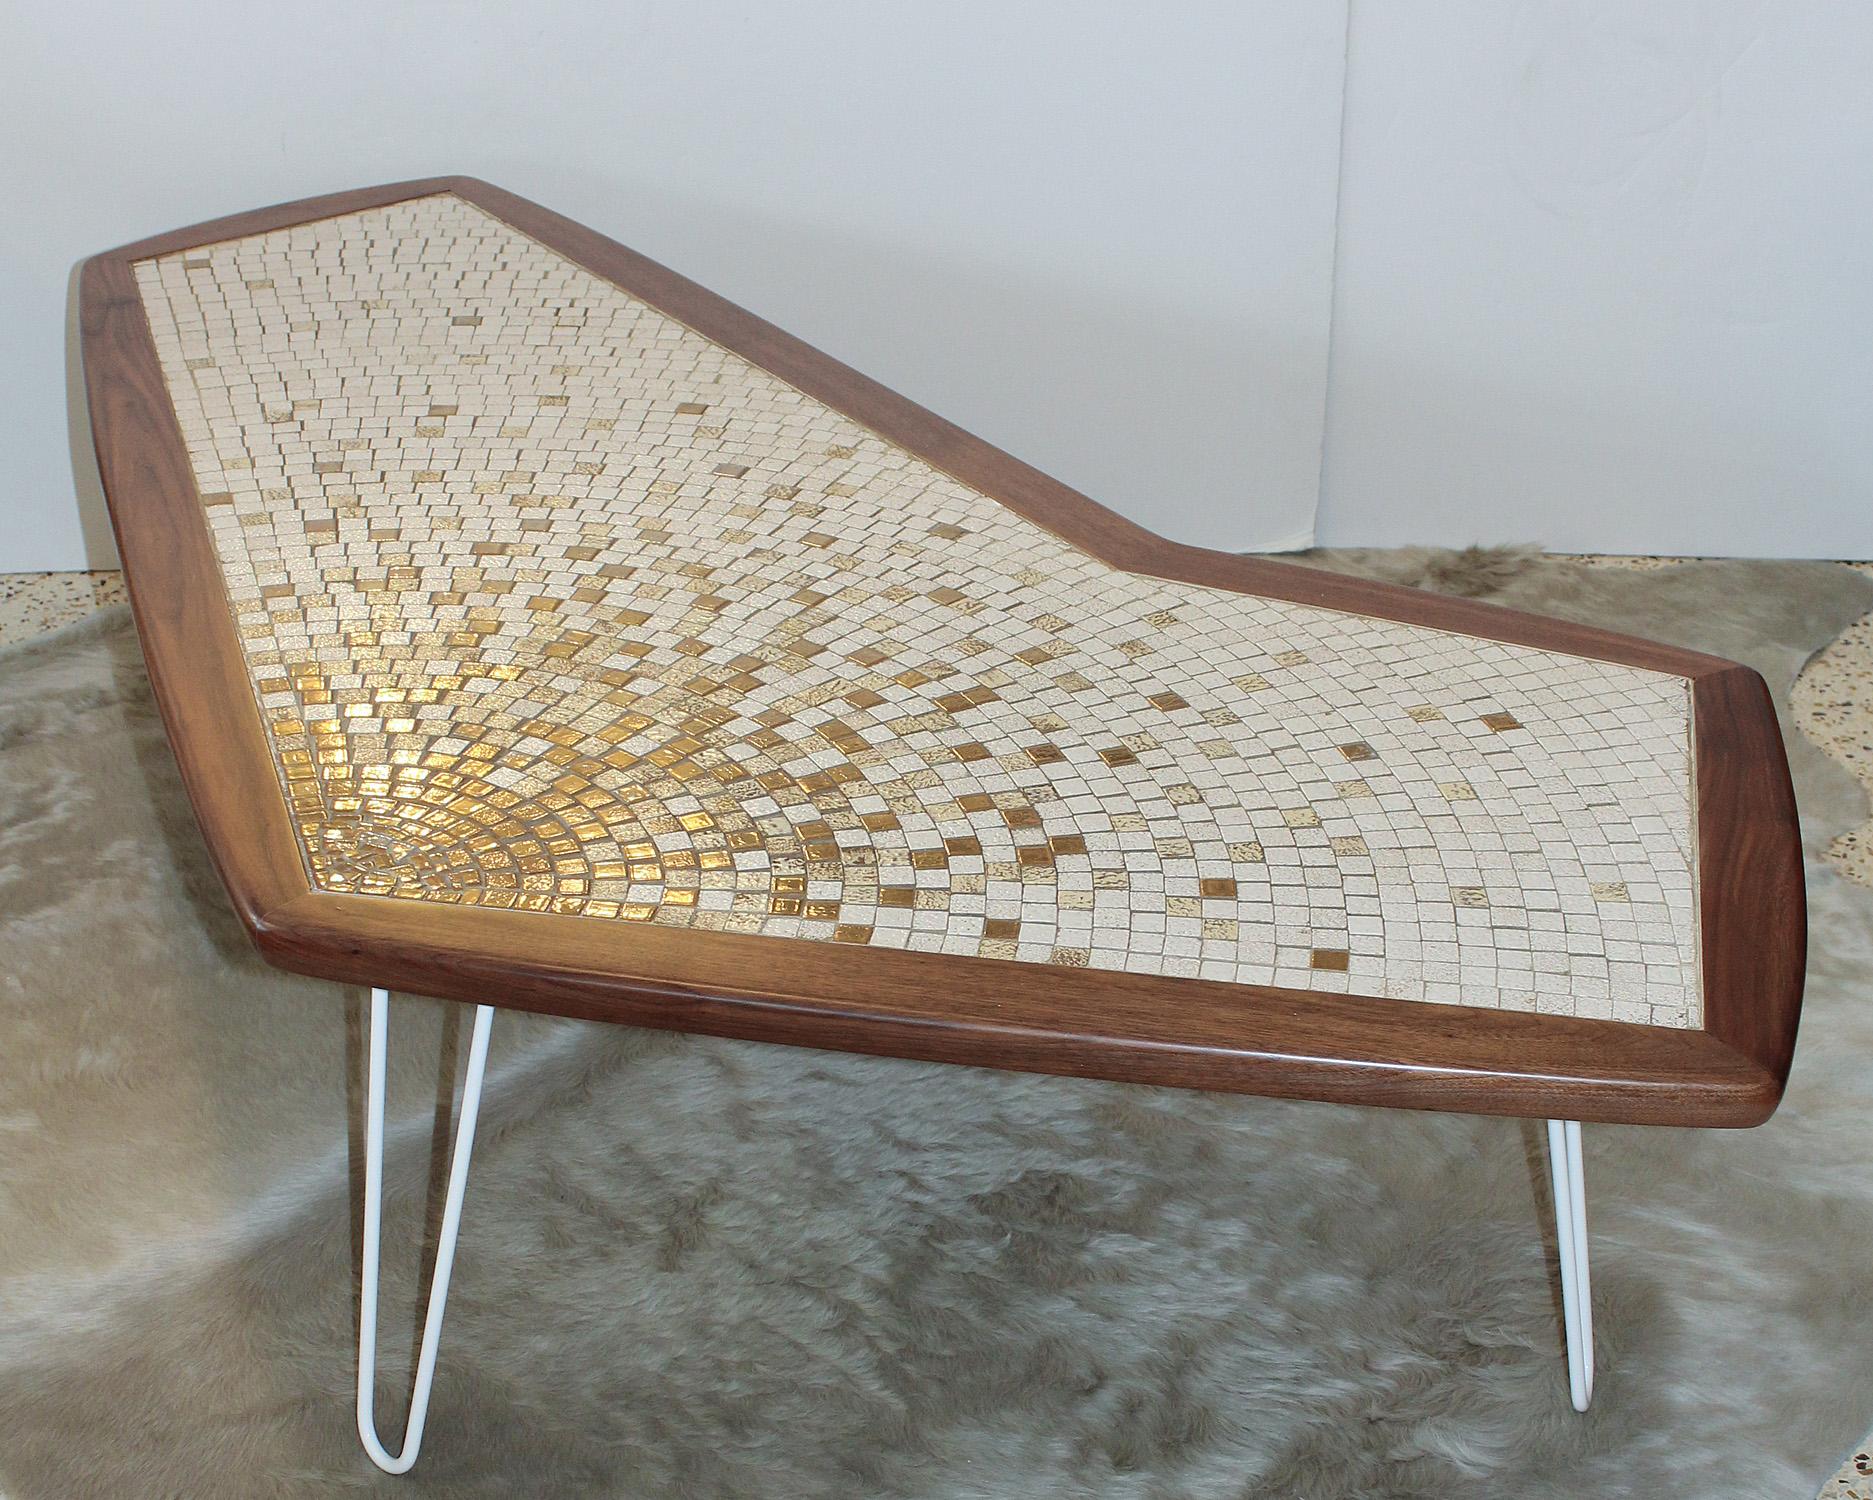 Restored Classic 1960s American modernist boomerang coffee table with walnut frame, white enameled hairpin legs, and top in white and metallic gold glazed tiles.